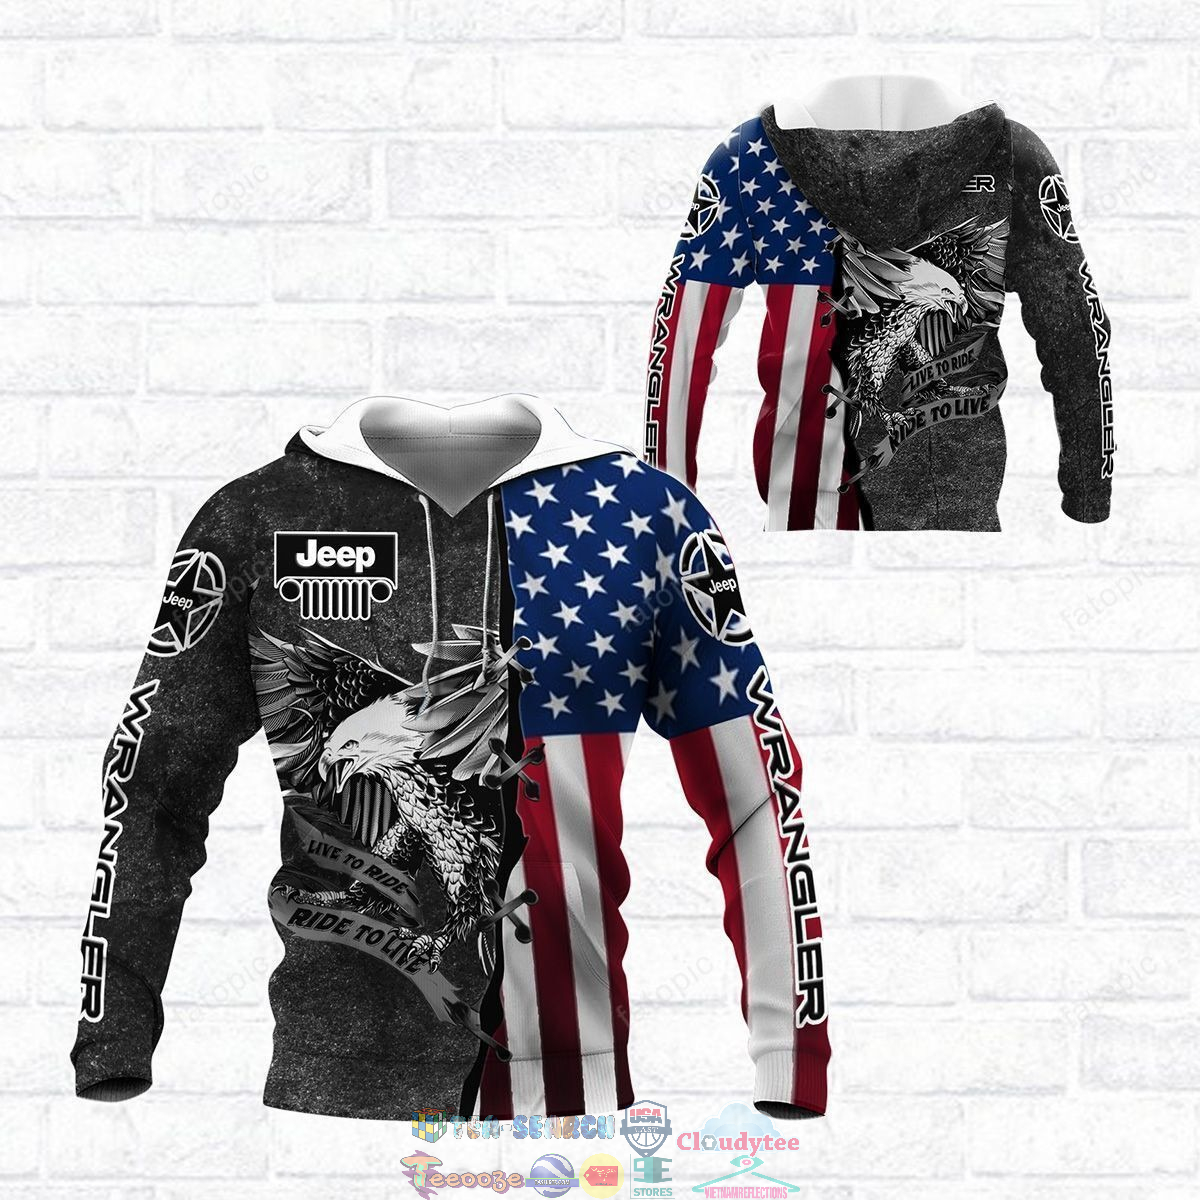 Jeep Wrangler Eagle American Flag ver 1 3D hoodie and t-shirt